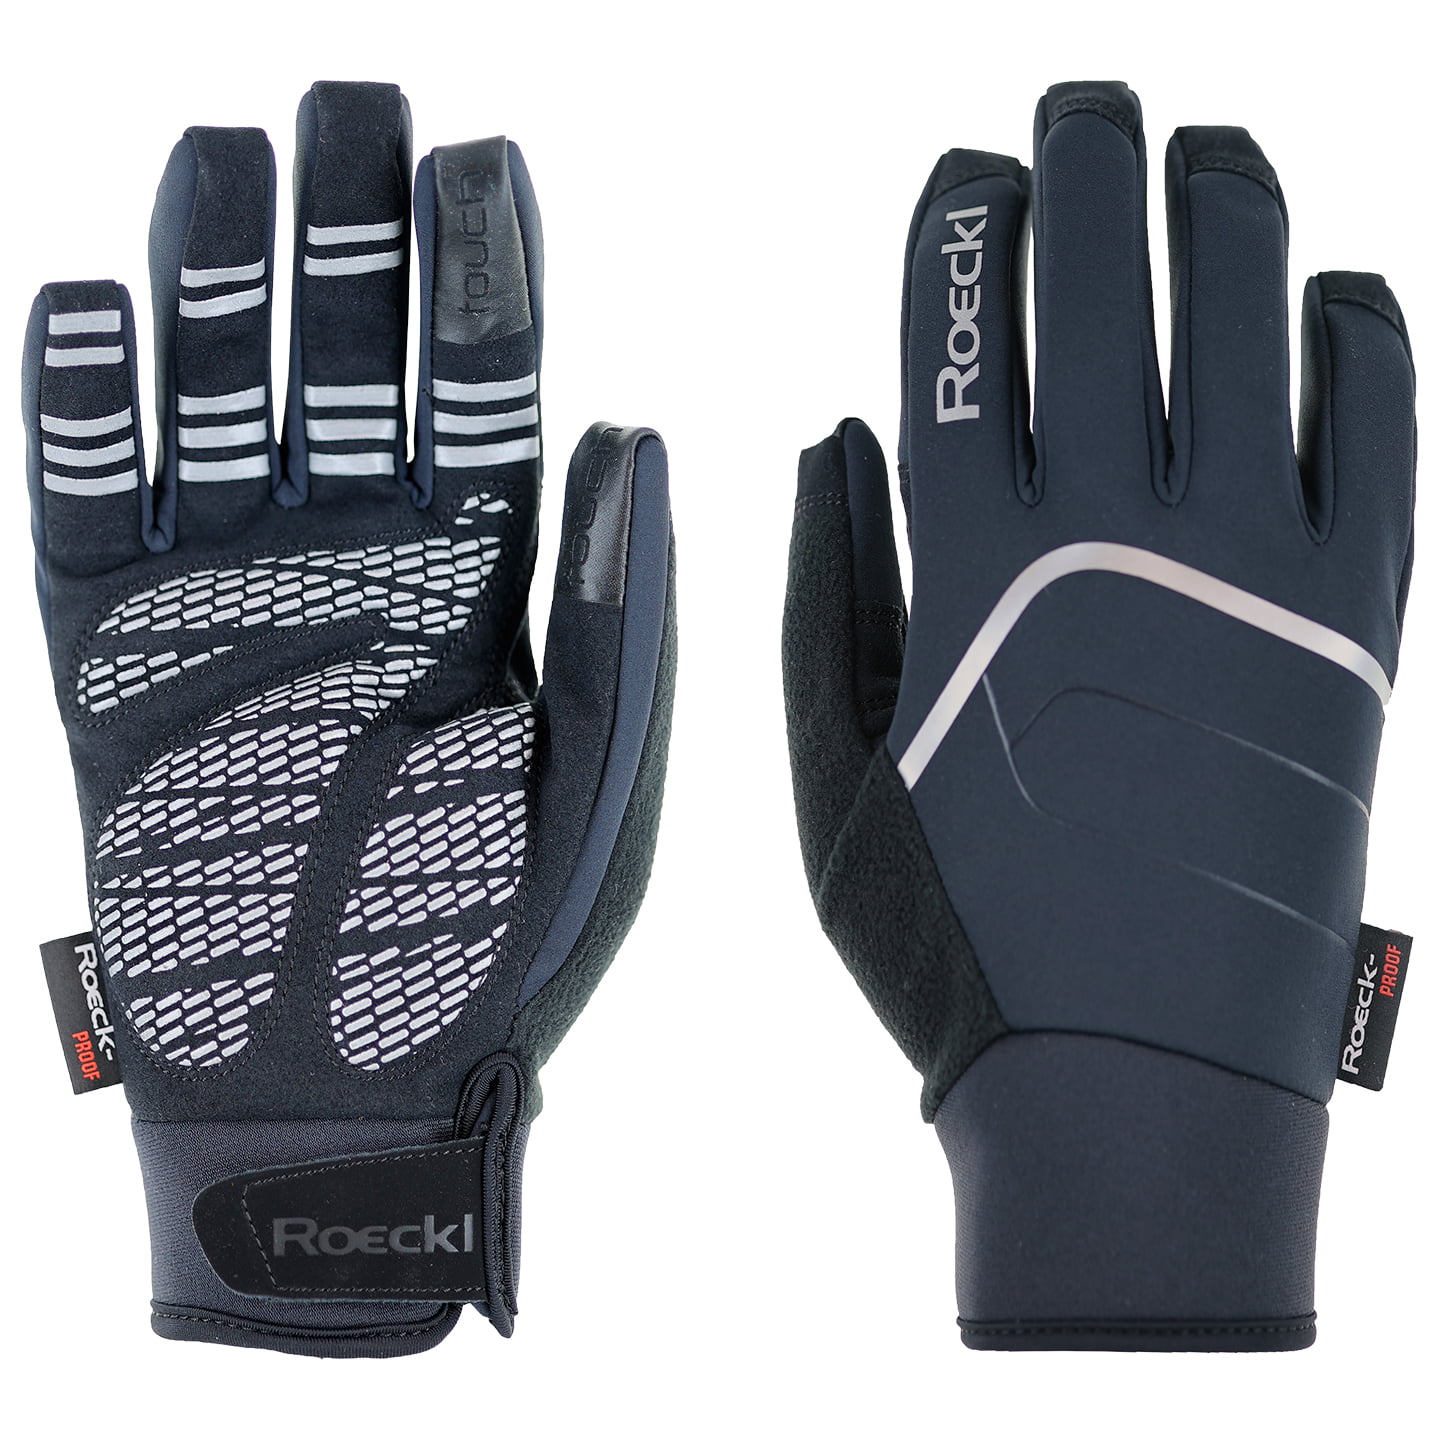 ROECKL Winter Gloves Roen 2 Winter Cycling Gloves, for men, size 7,5, MTB gloves, MTB clothing